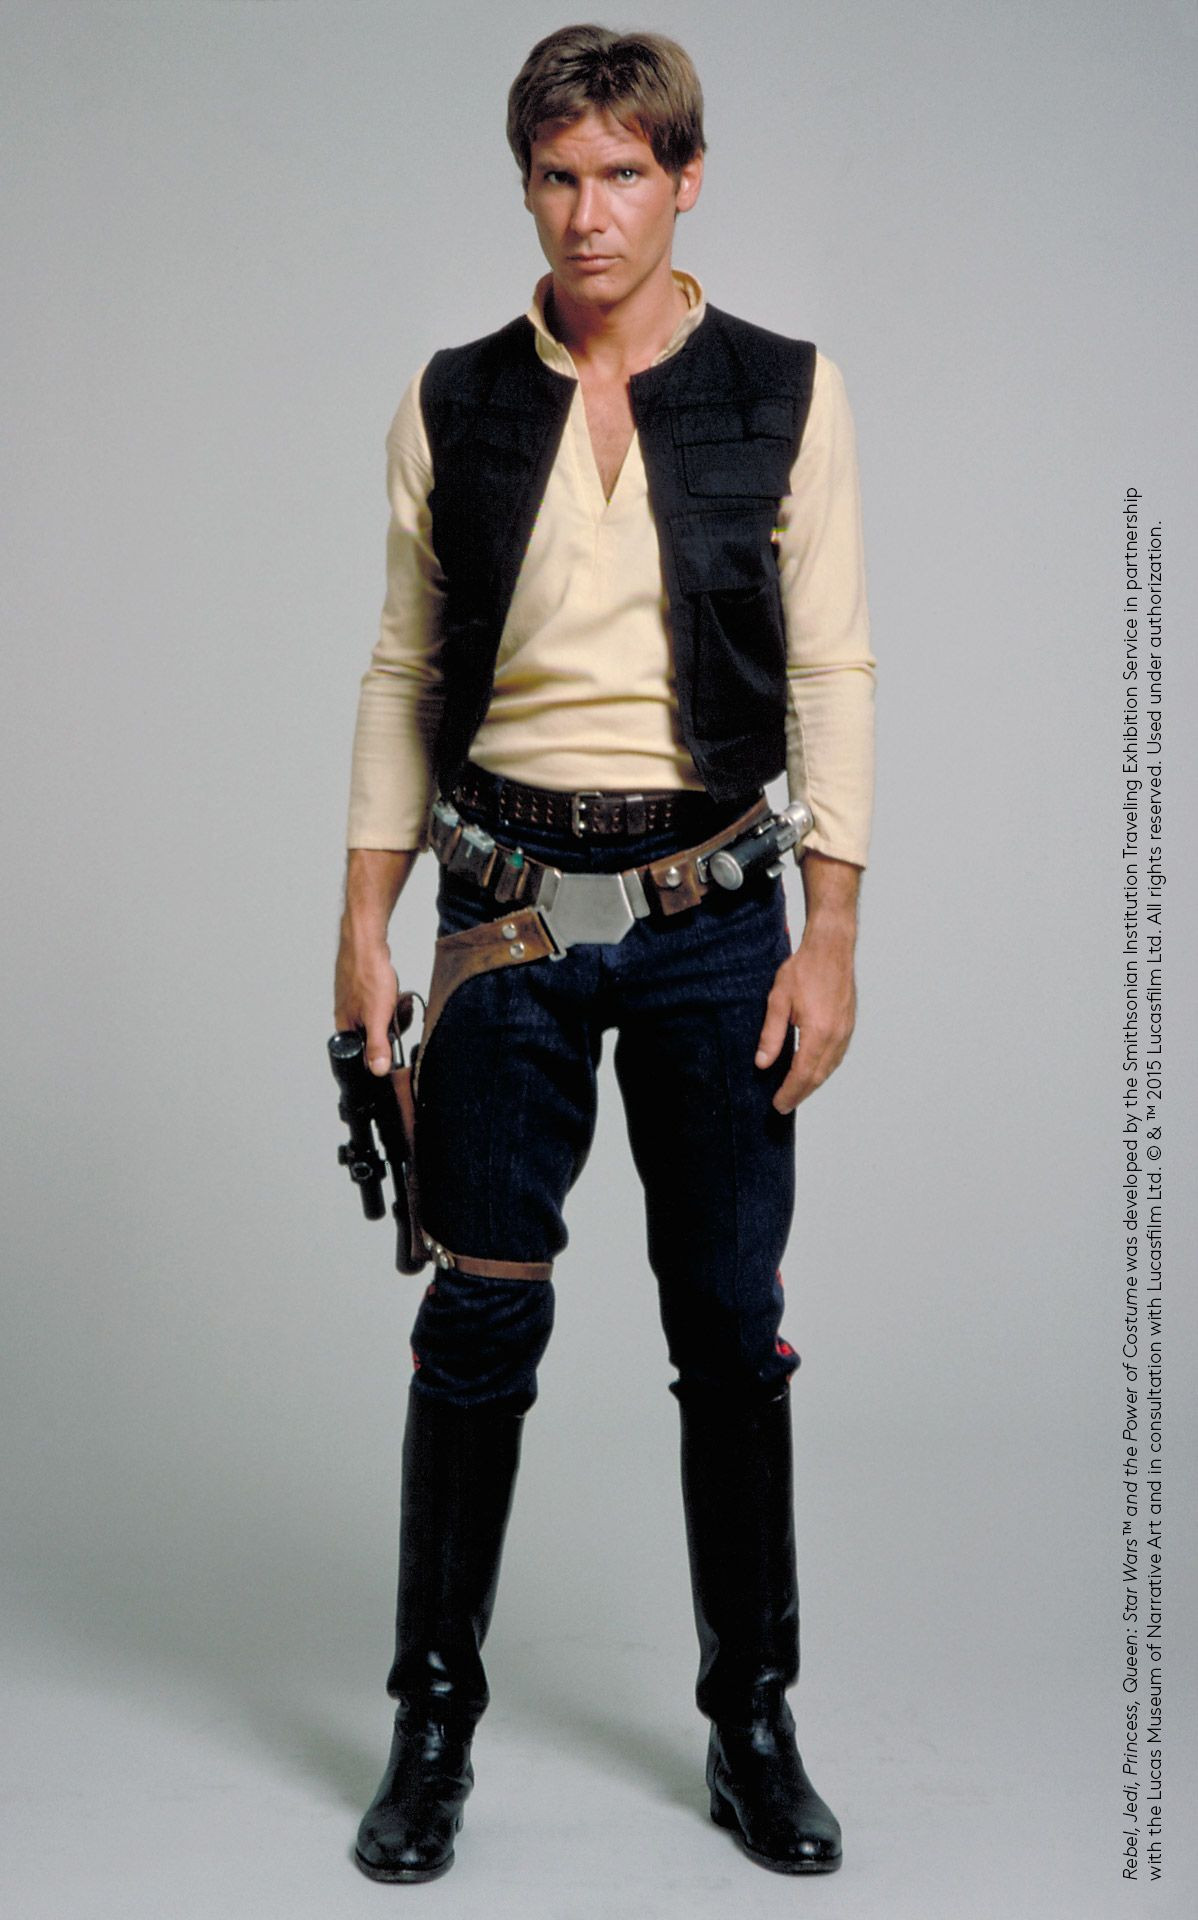 Han Solo Costume DIY
 Inspiration for Han Solo’s gun belt was drawn from